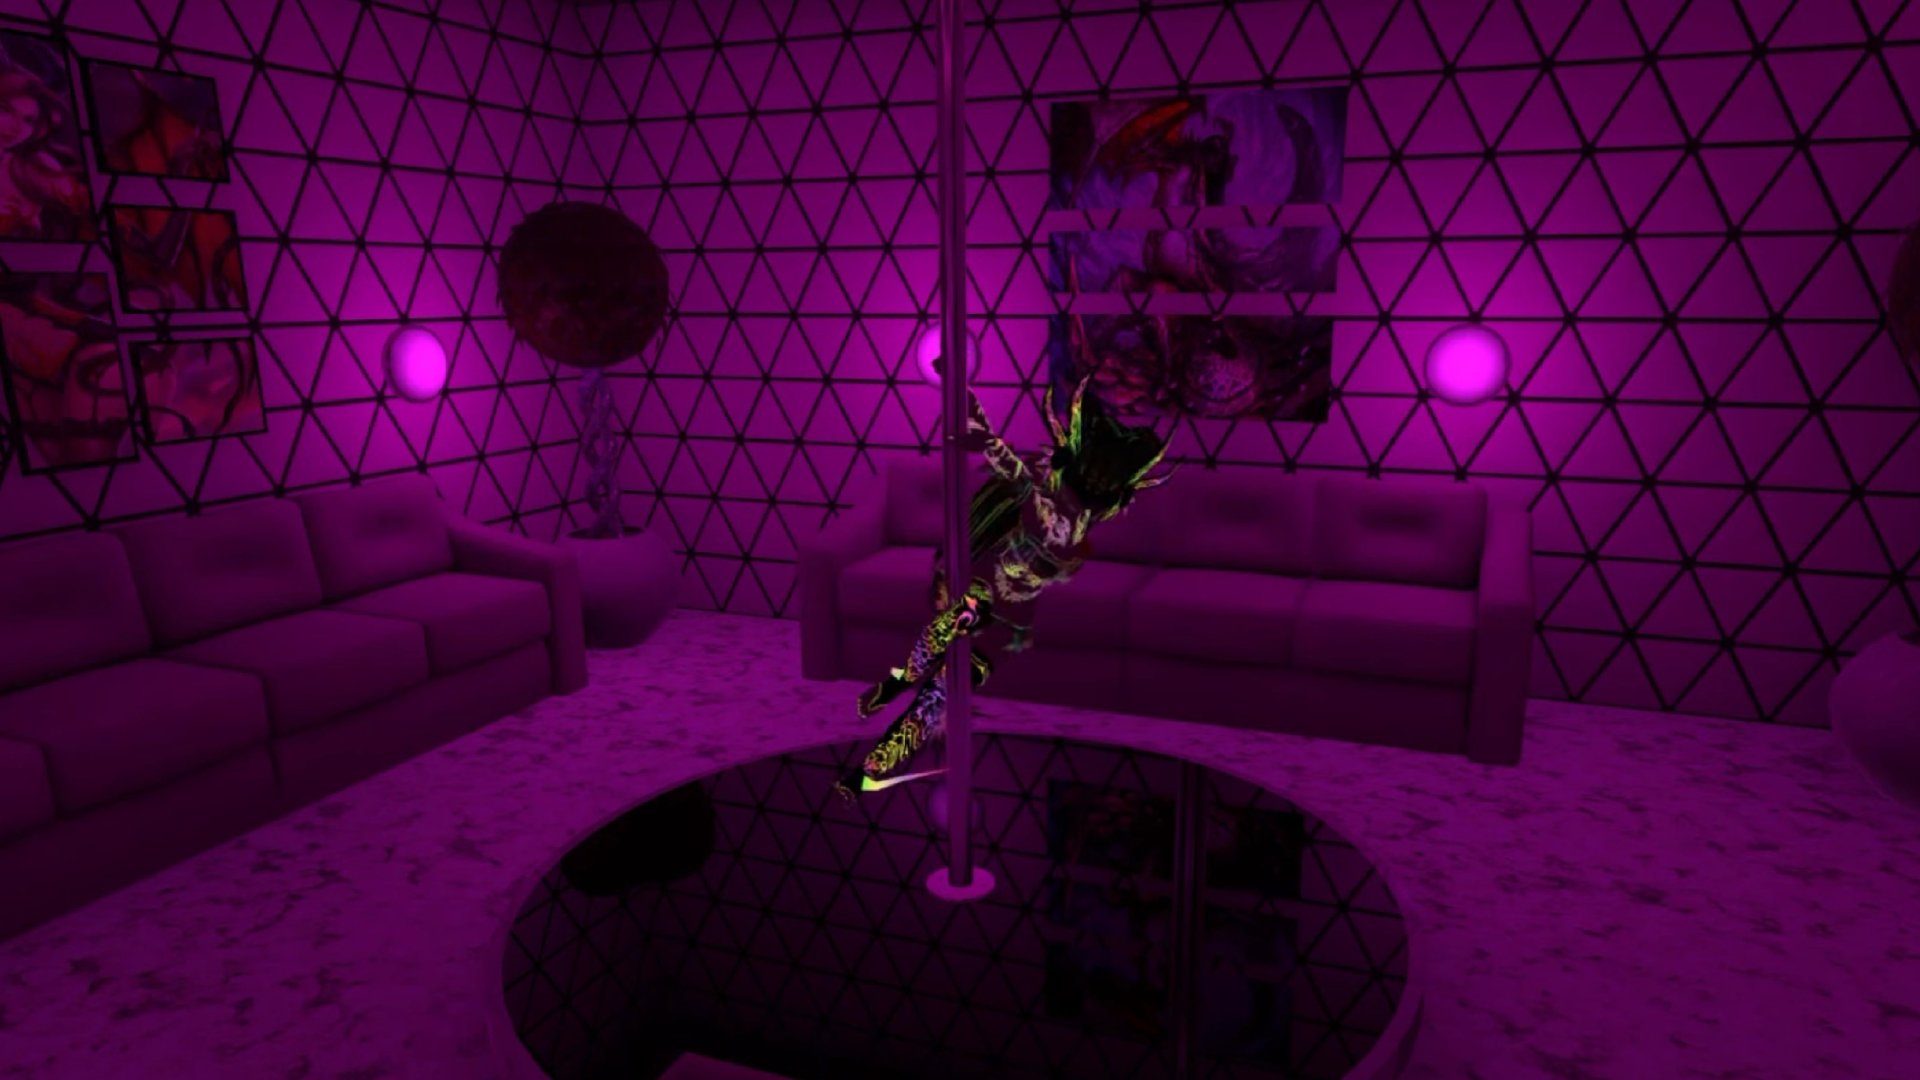 VR artist brings pole dancing to virtual reality, and it's quite a sight